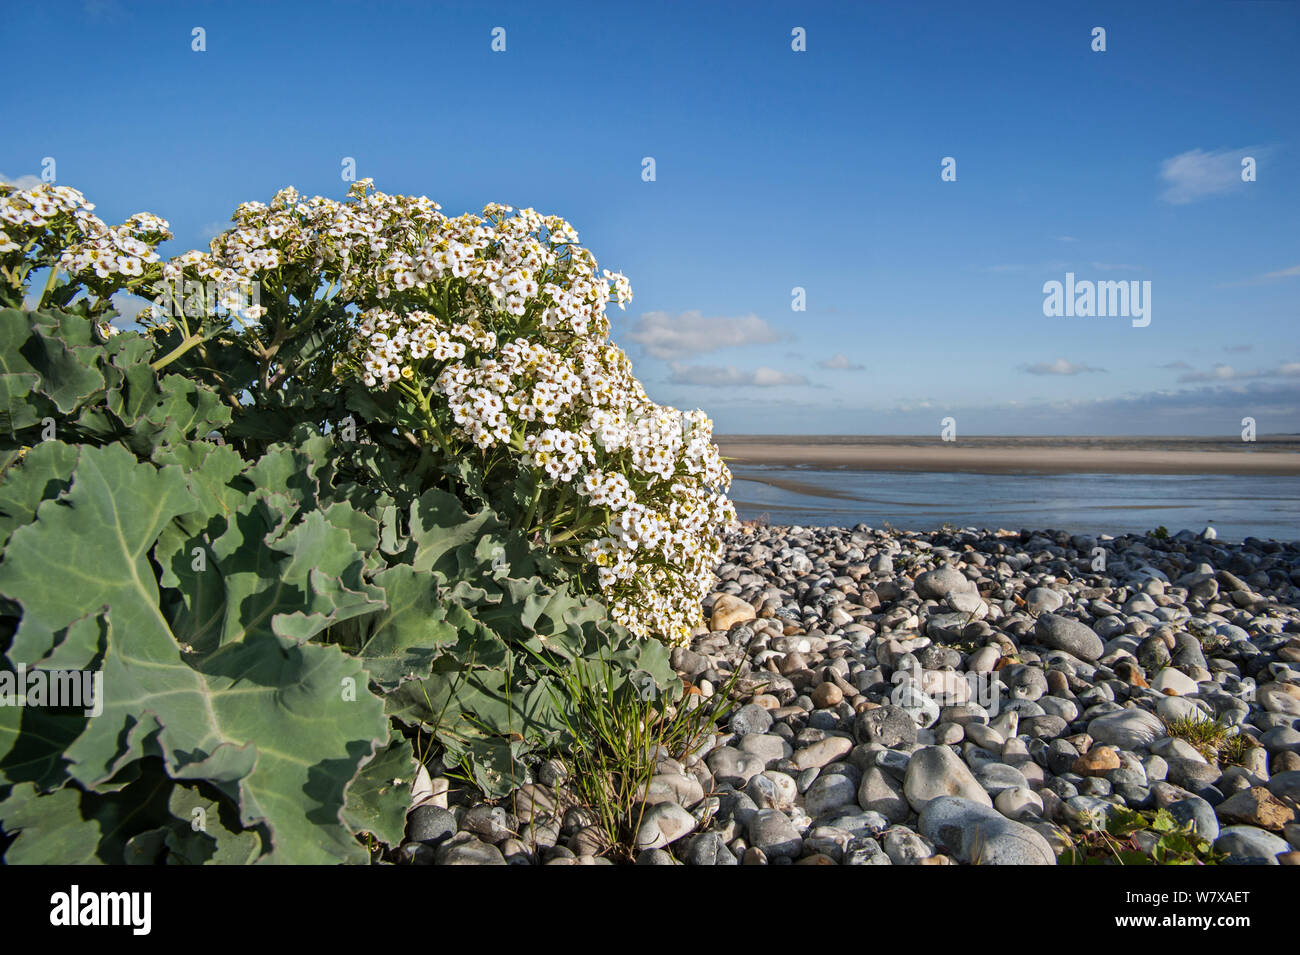 Sea kale (Crambe maritima) in flower on pebble beach, Bay of the Somme, Picardy, France. Stock Photo